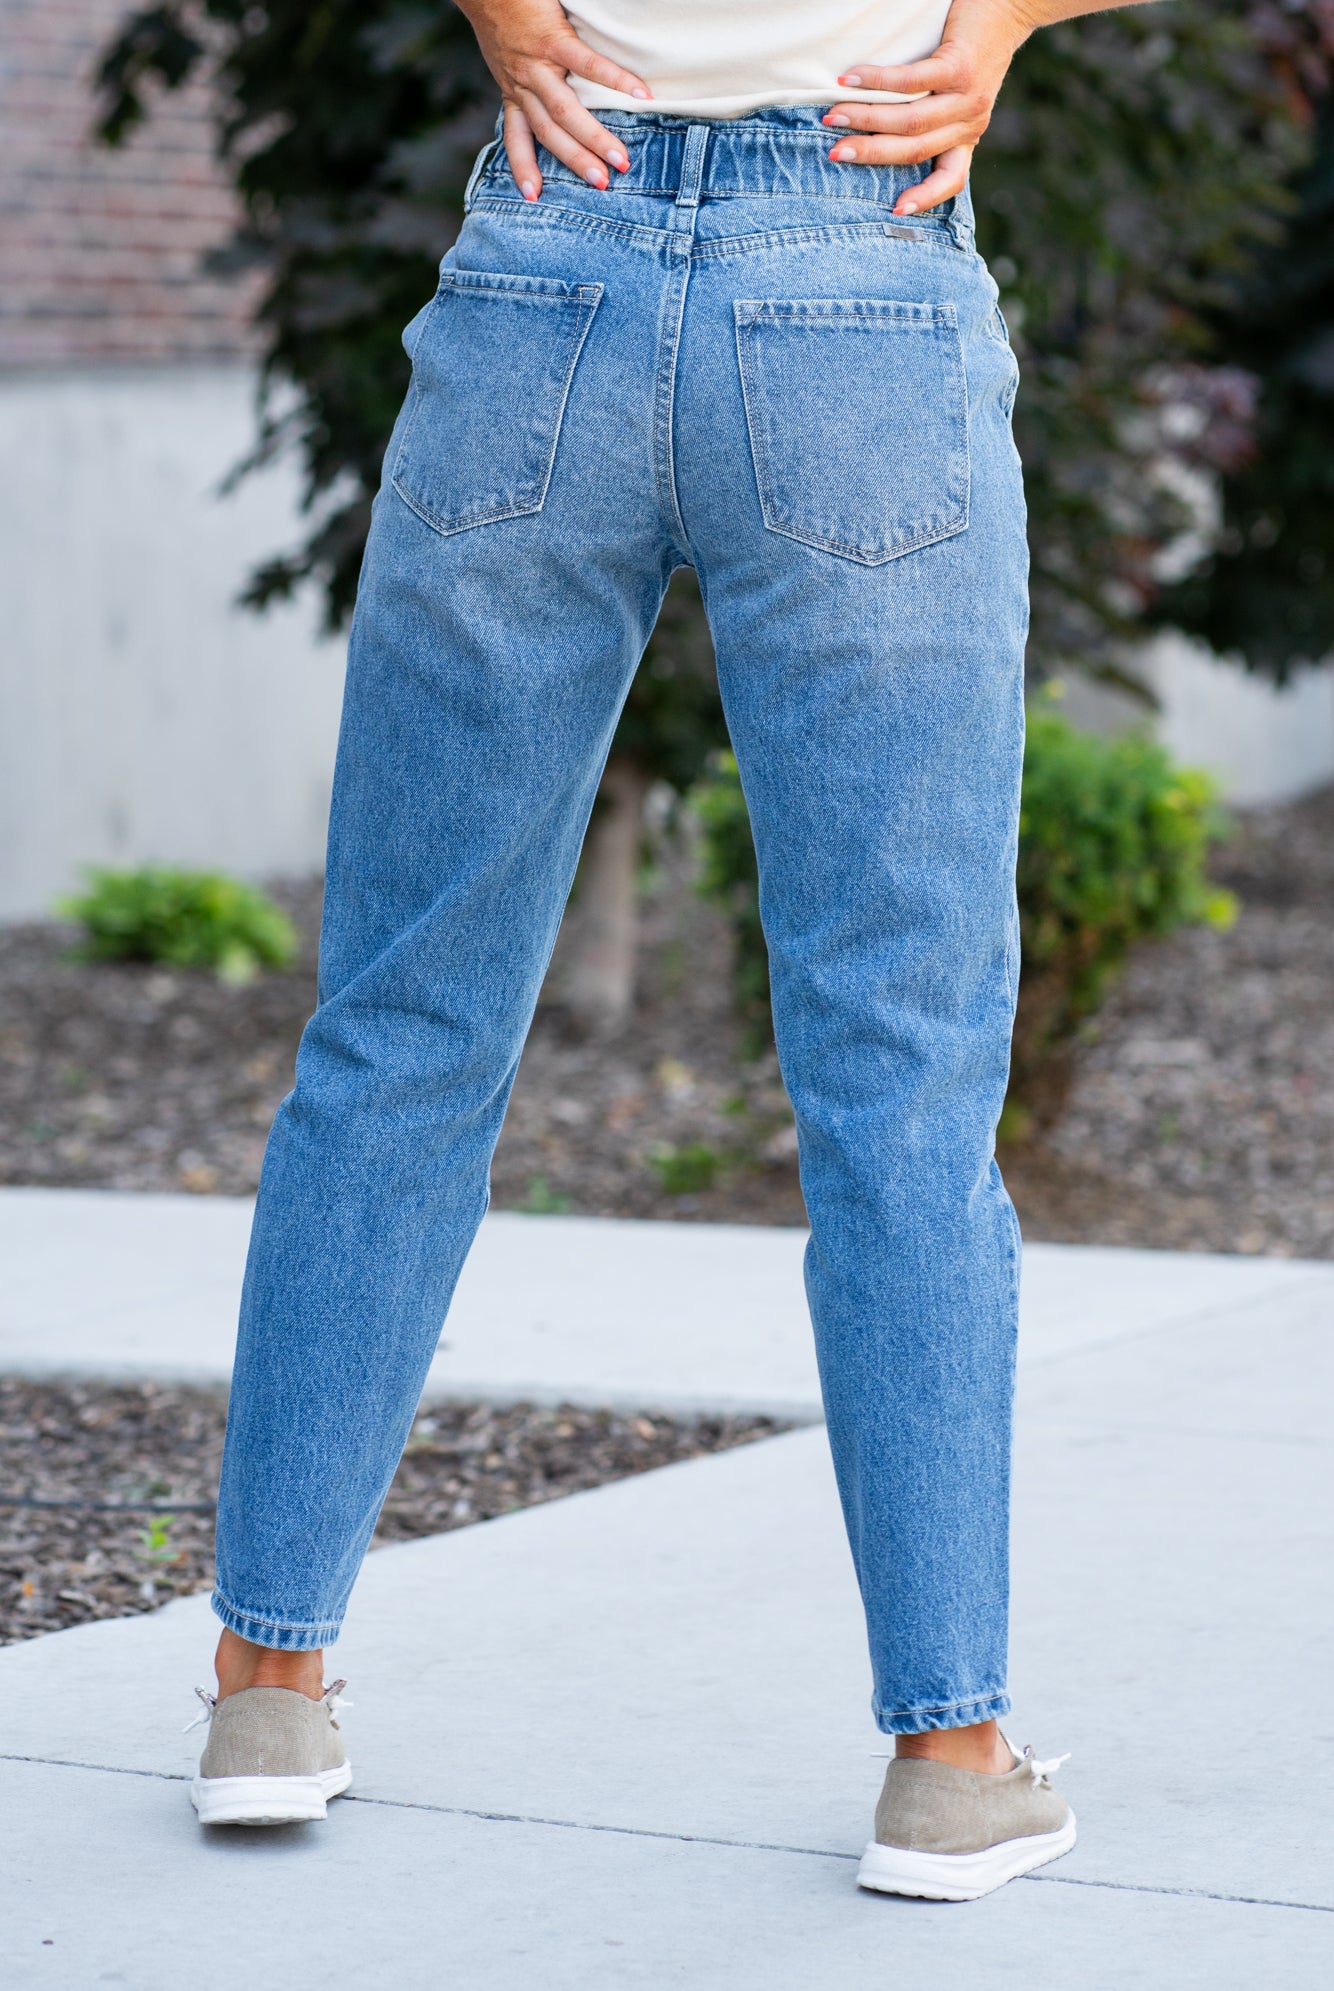 KanCan Jeans  With a high waist straight fit, these will be your go-to jeans that will never go out of style.  Color: Medium Blue  Cut: Straight Fit, 28.5" Inseam* Rise: High-Rise, 11.5" Front Rise* 100% COTTON Fly: Zipper  Style #: KC7991M Contact us for any additional measurements or sizing.  *Measured on the smallest size, measurements may vary by size.